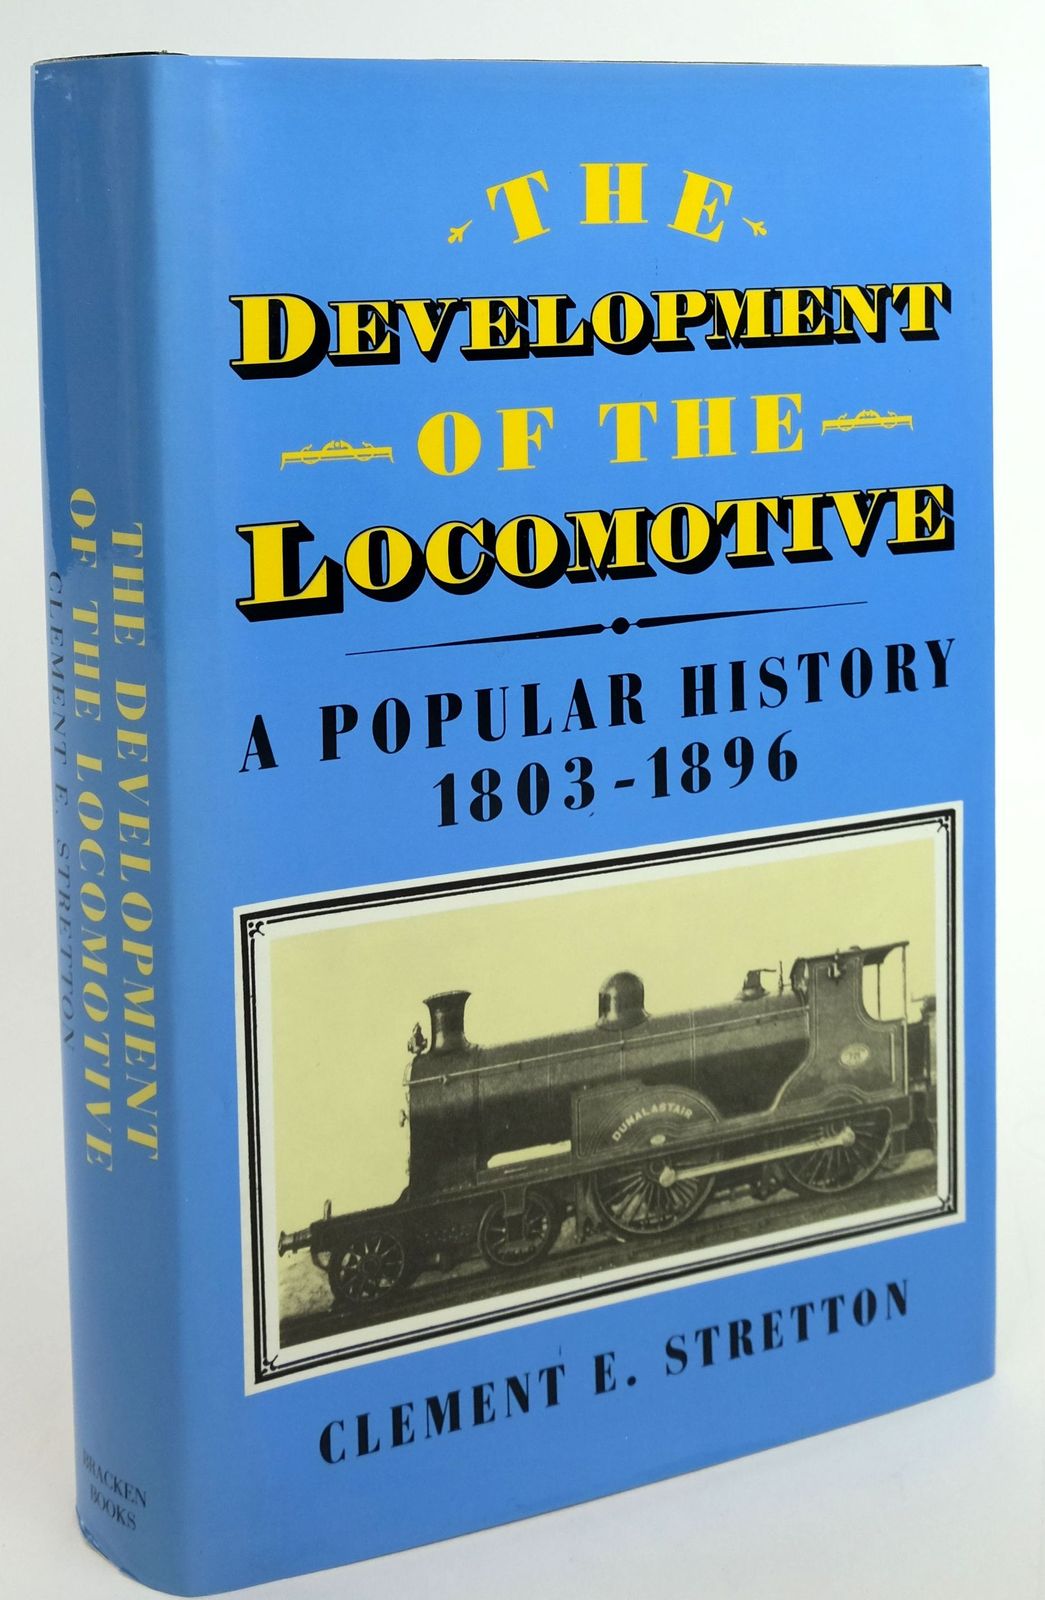 Photo of THE DEVELOPMENT OF THE LOCOMOTIVE A POPULAR HISTORY 1803-1896- Stock Number: 1820007